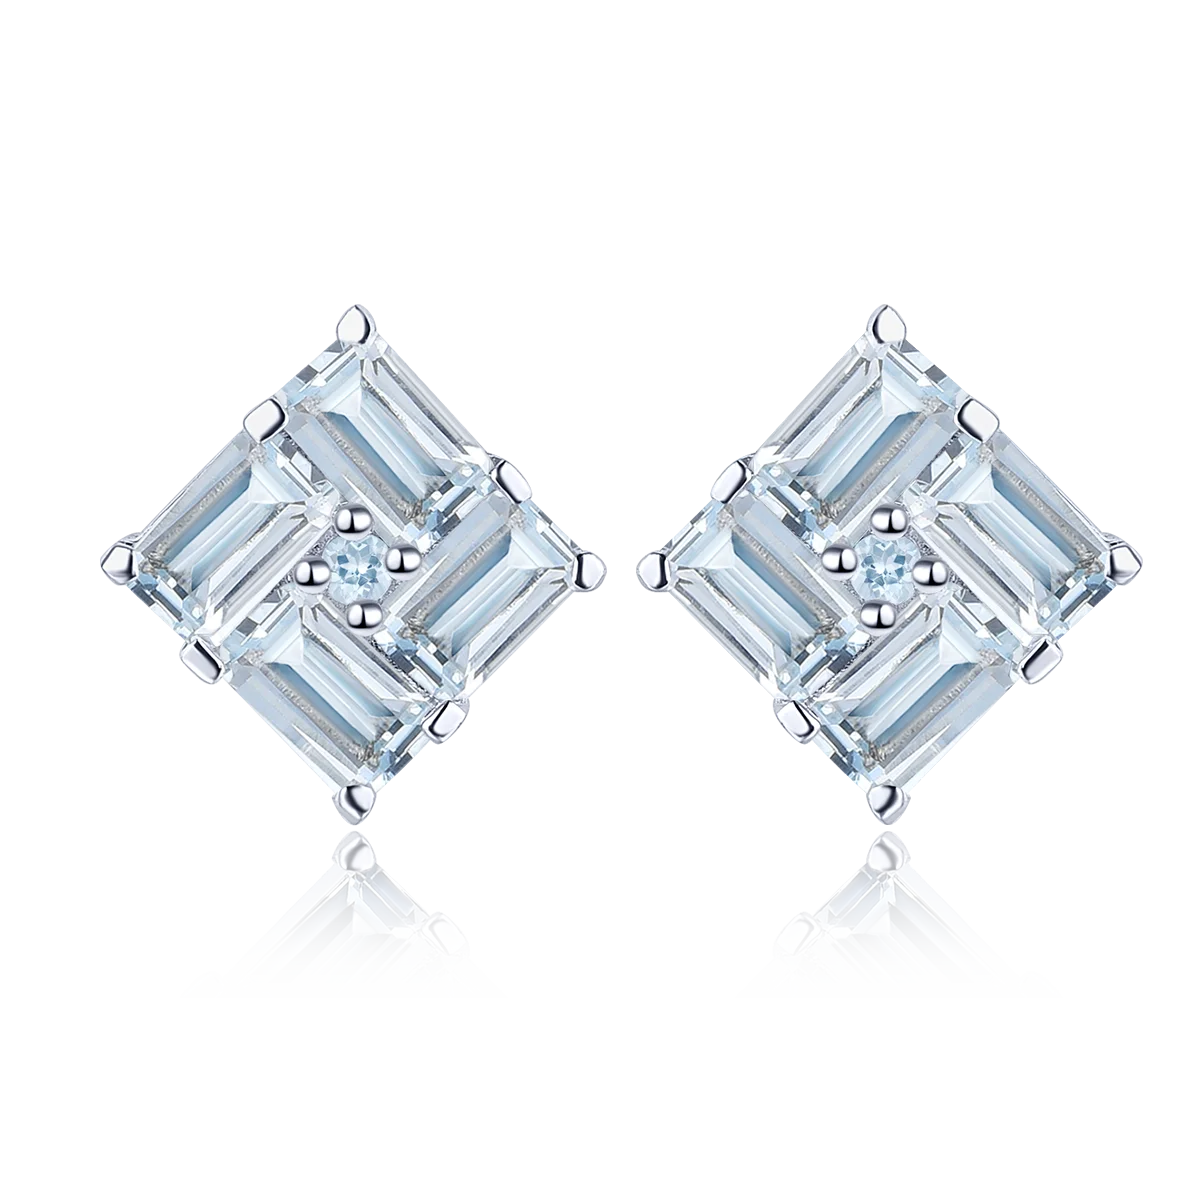 BOEYCJR 925 Silver Baguette Natural Aquamarine 1.99ct total Stud Earrings for Women Anniversary Gift